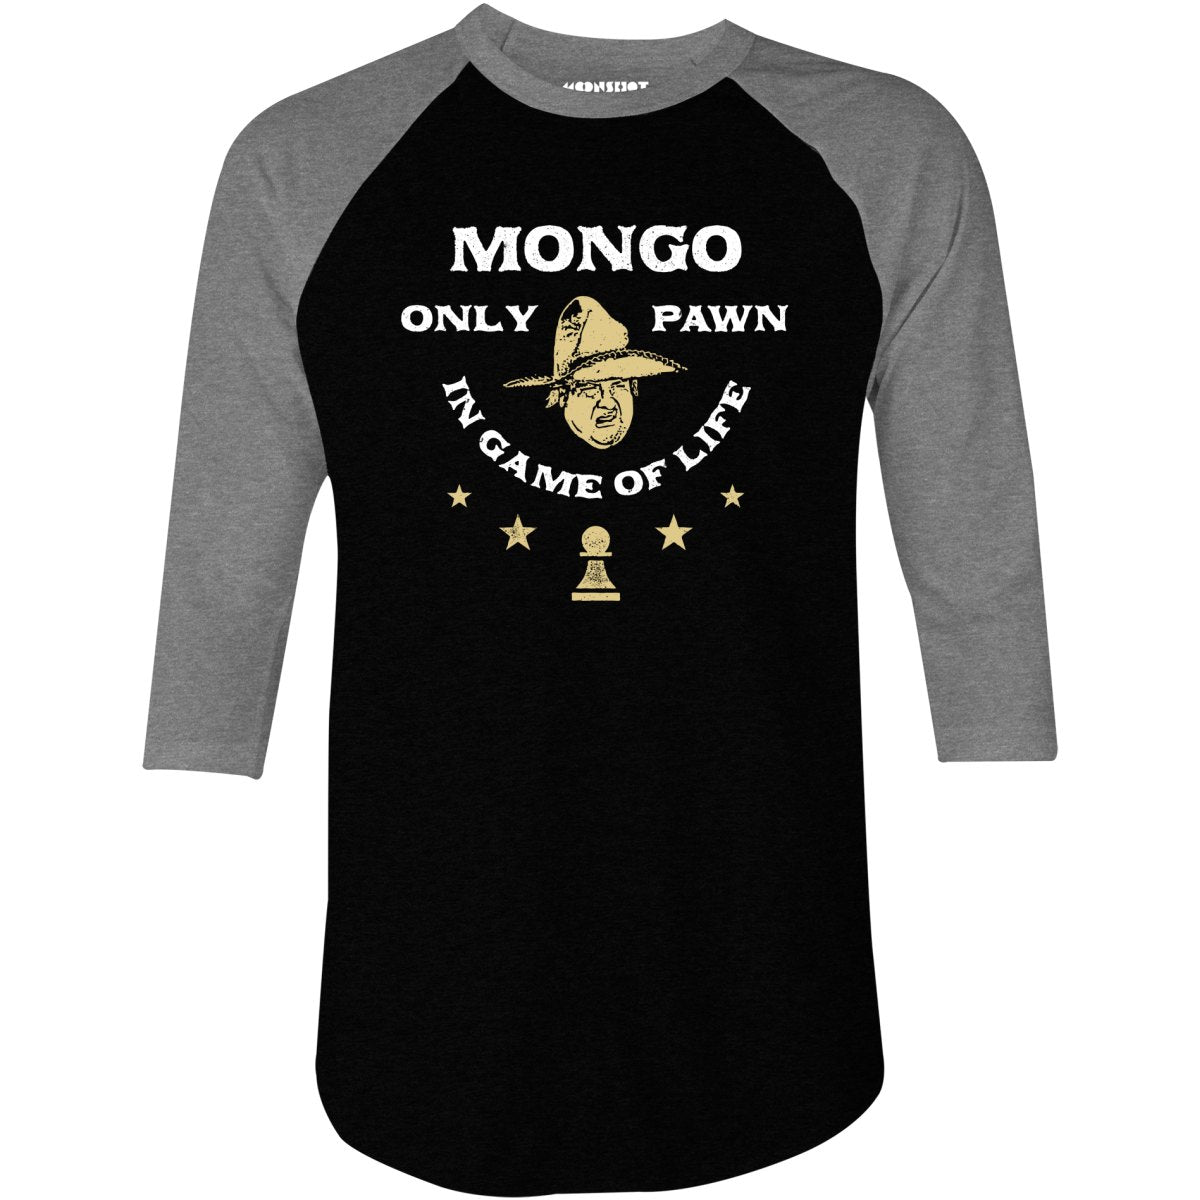 Mongo Only Pawn in Game of Life - 3/4 Sleeve Raglan T-Shirt